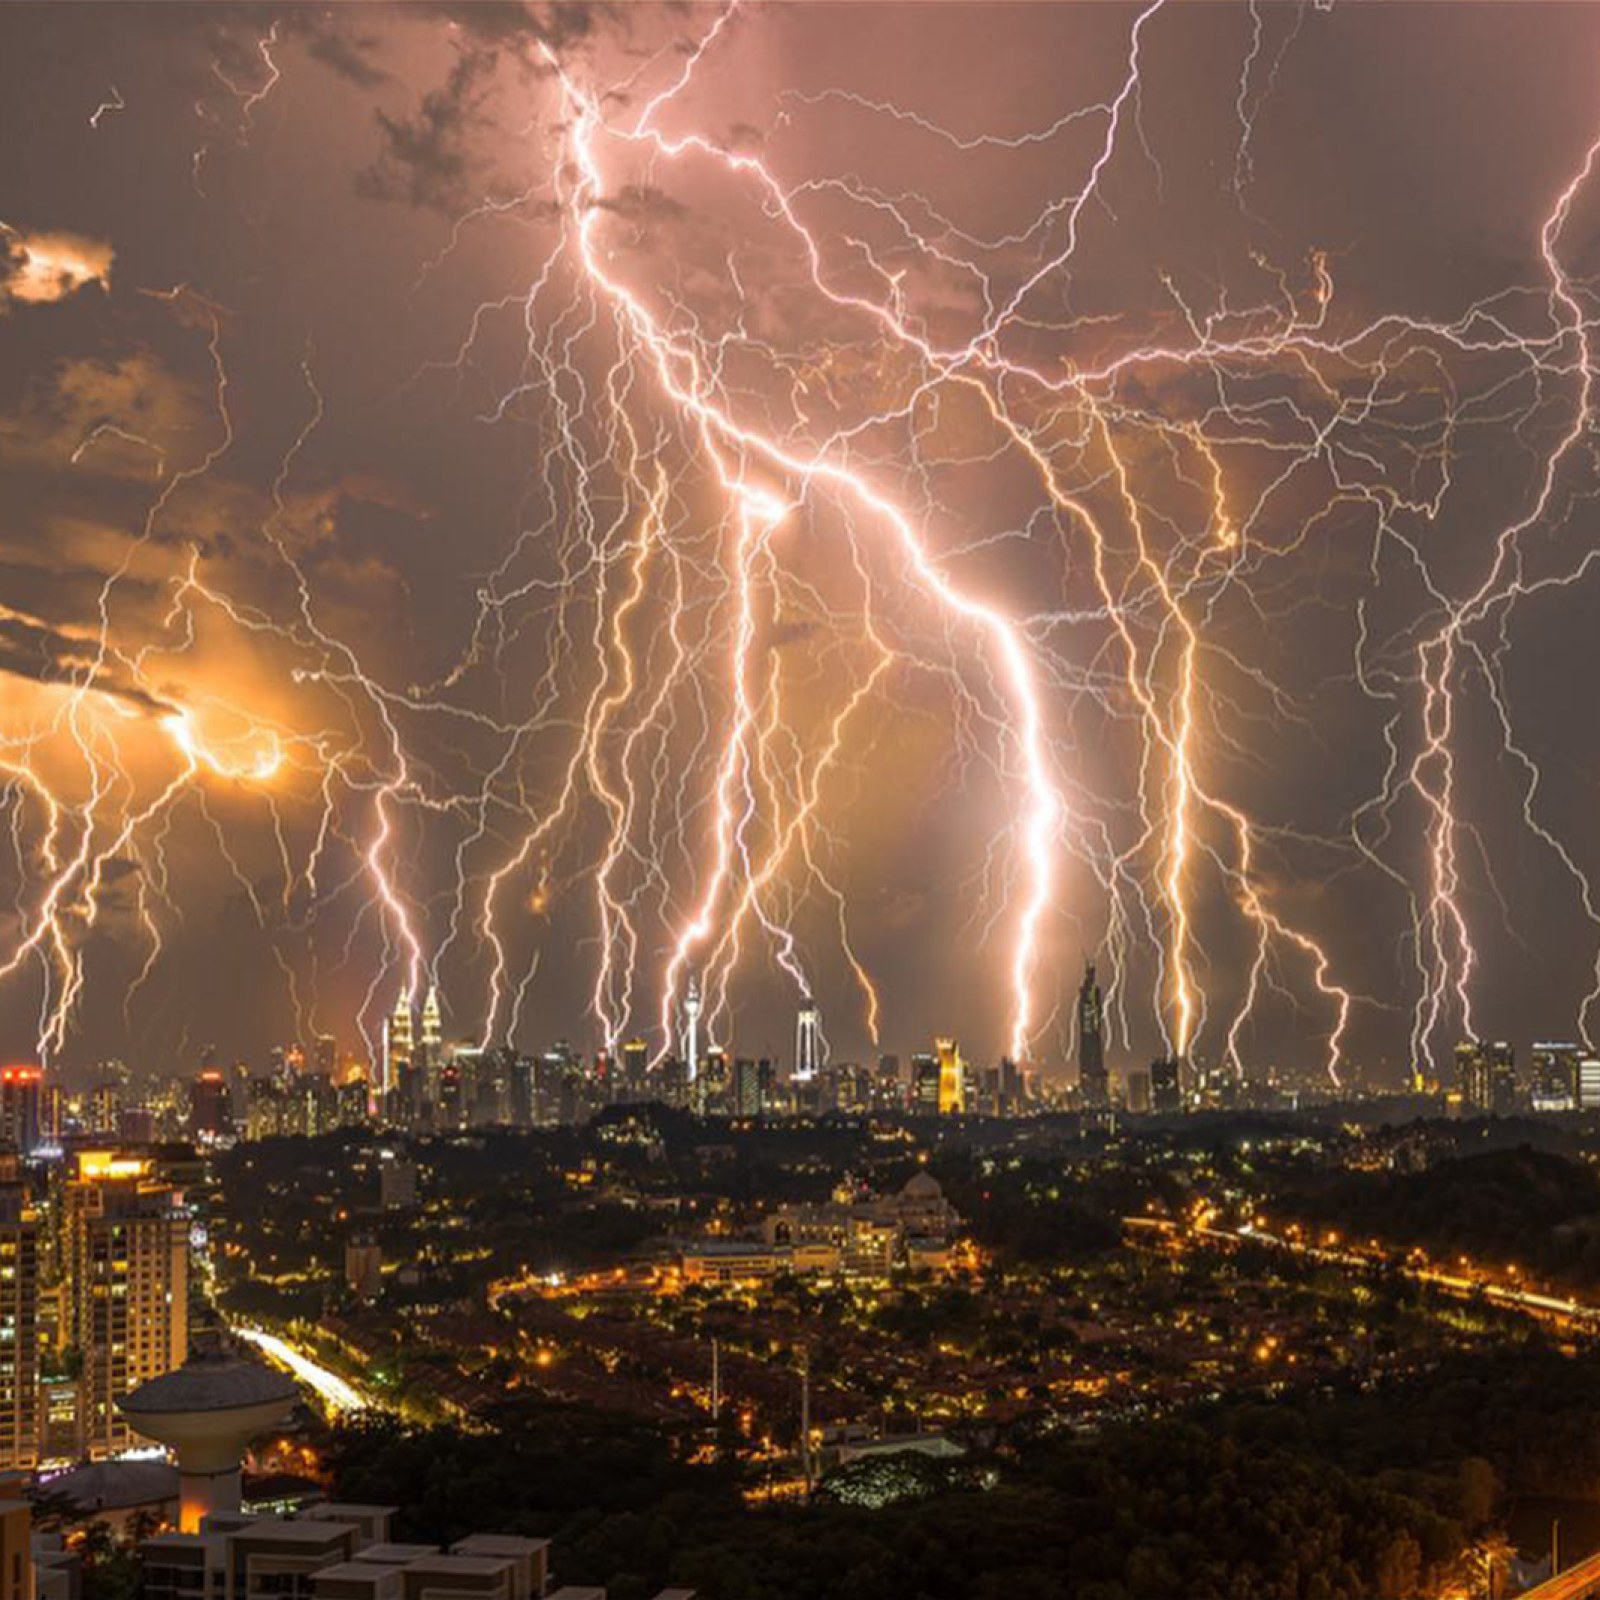 Impressive Photo Shows Lightning Strike City in One-of-a-Kind Storm